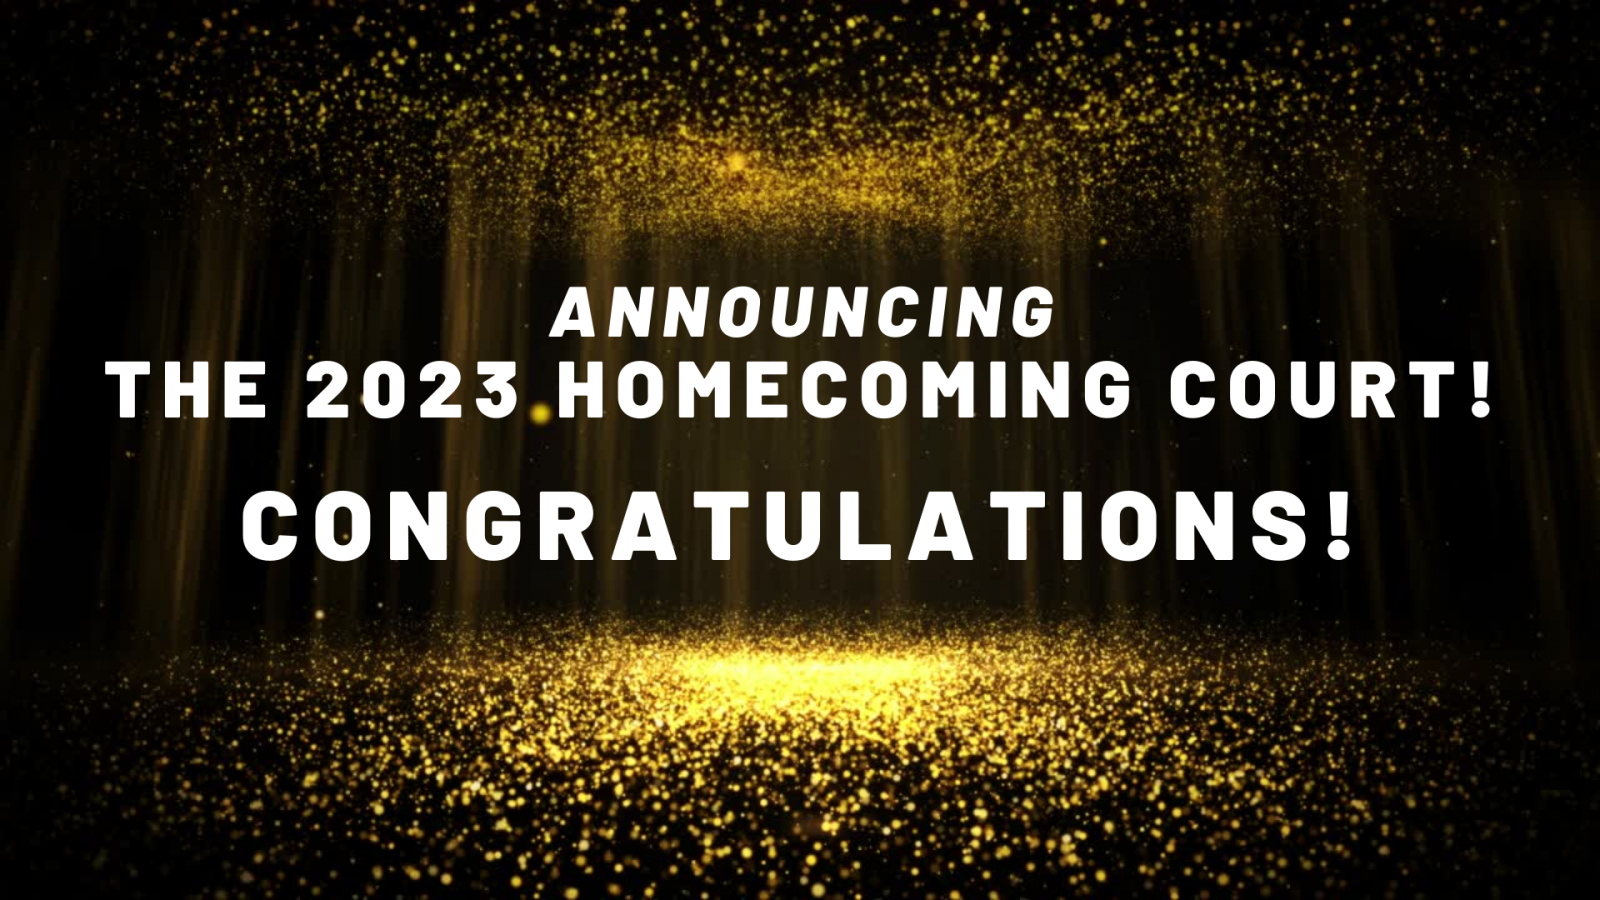 An image of gold confetti. Text: "Announcing the 2023 Homecoming Court! Congratulations!